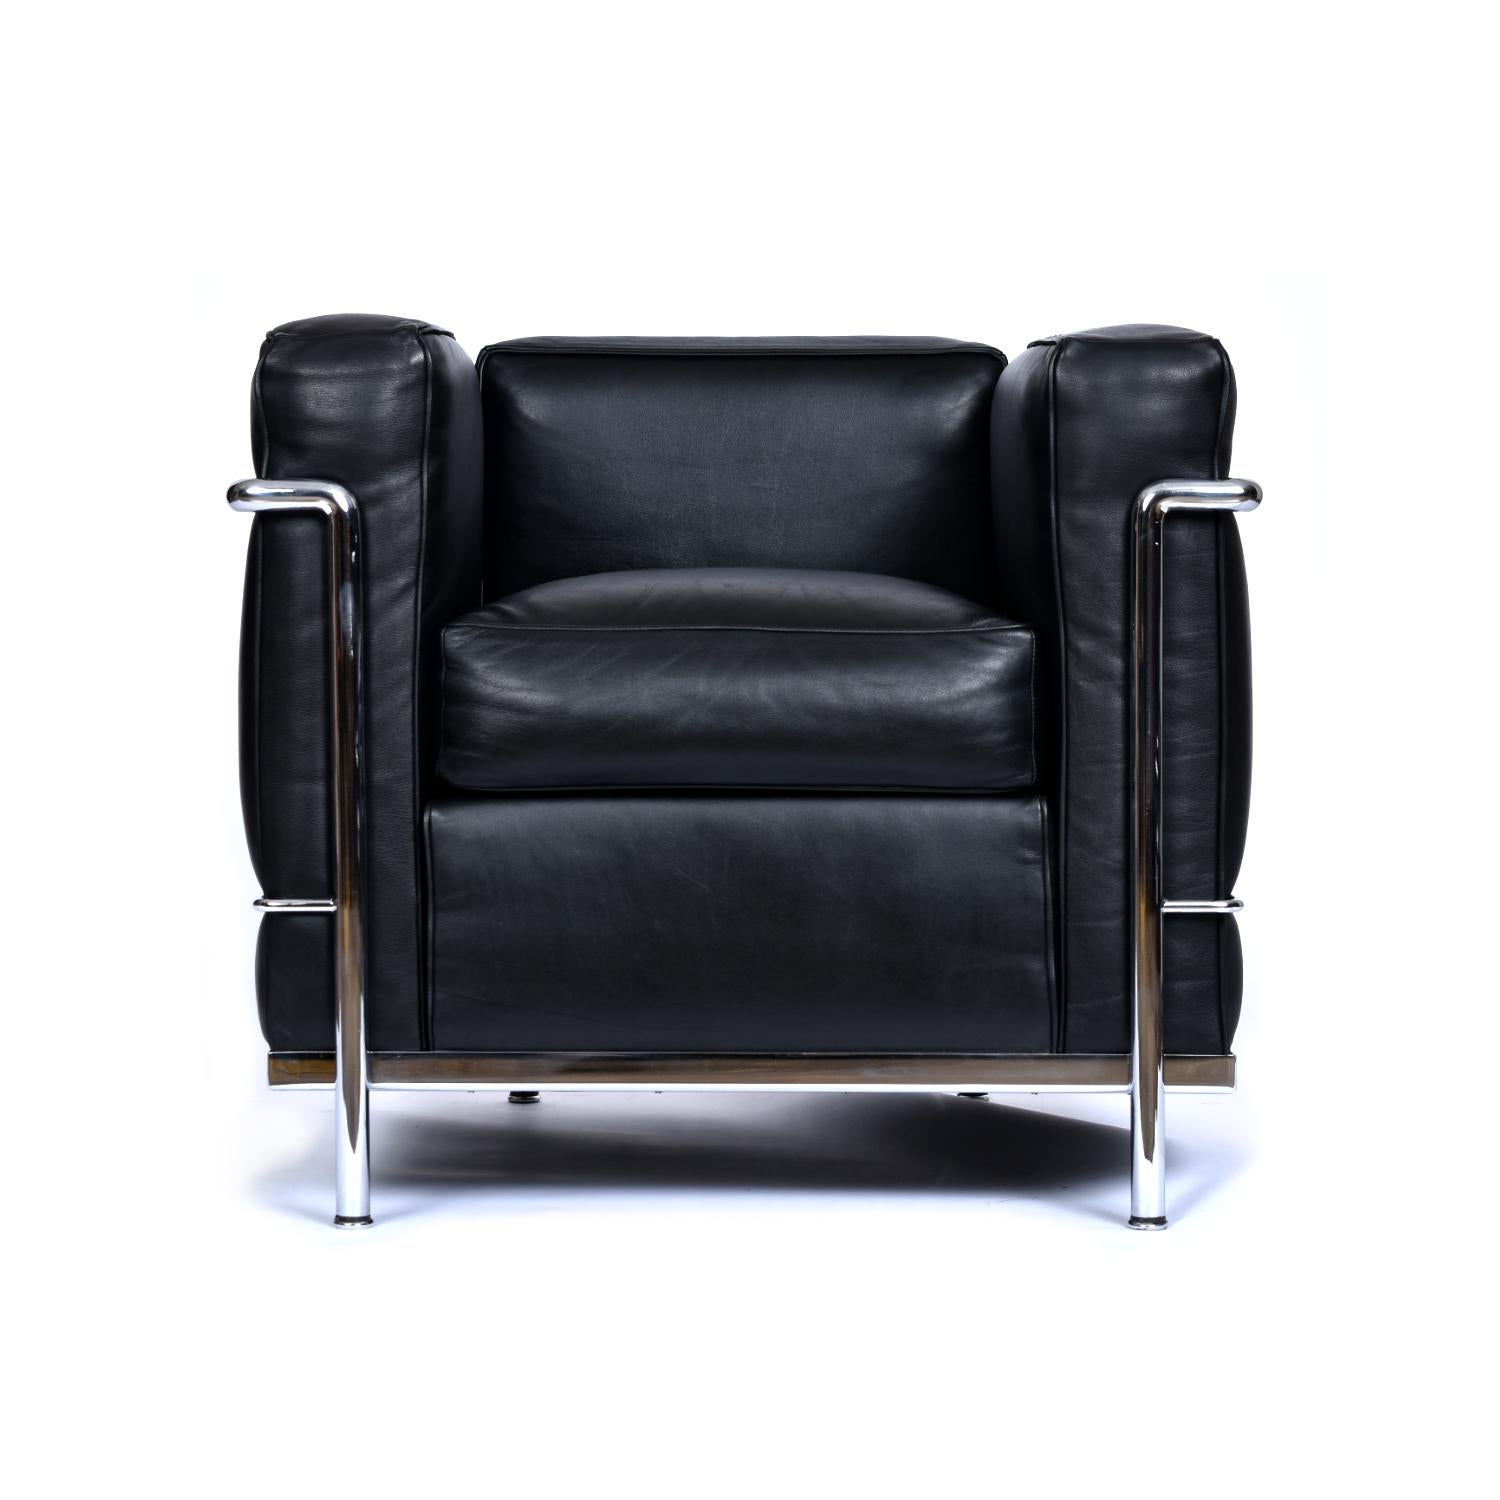 Each sold separately. (2) matching black leather and chrome Cassina Licensed LC2 Petit confort chairs by Atelier International available. Made in the USA. 

Thick, rich, smooth leather wraps the surprisingly comfortable cushions on this timeless